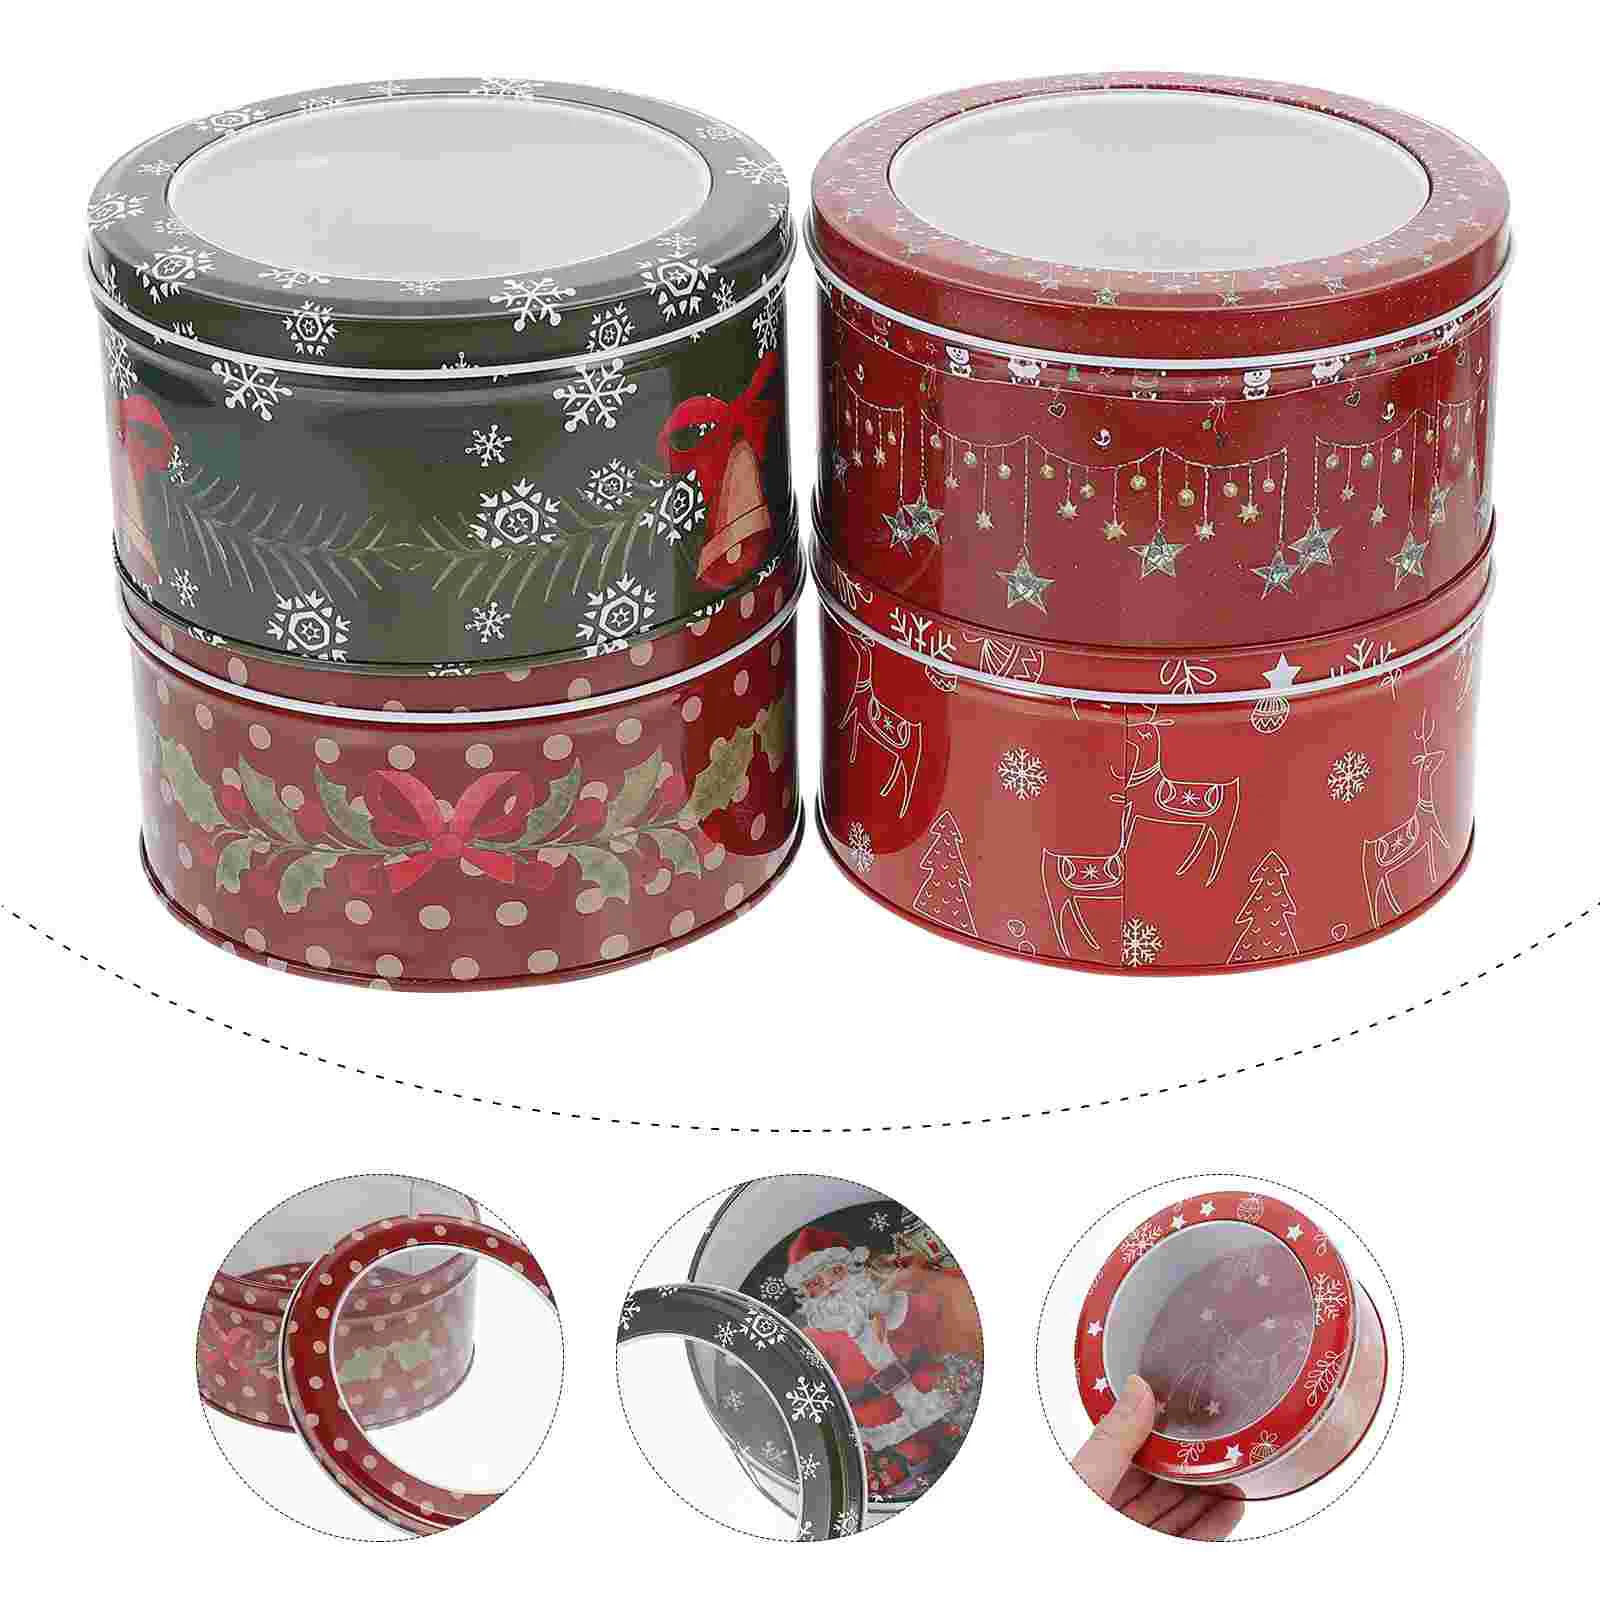 

Christmas Box Tin Candy Cookie Xmas Tinplate Gift Boxes Tins Metal Biscuits Jar Holiday Containers Party Present Santa Lids